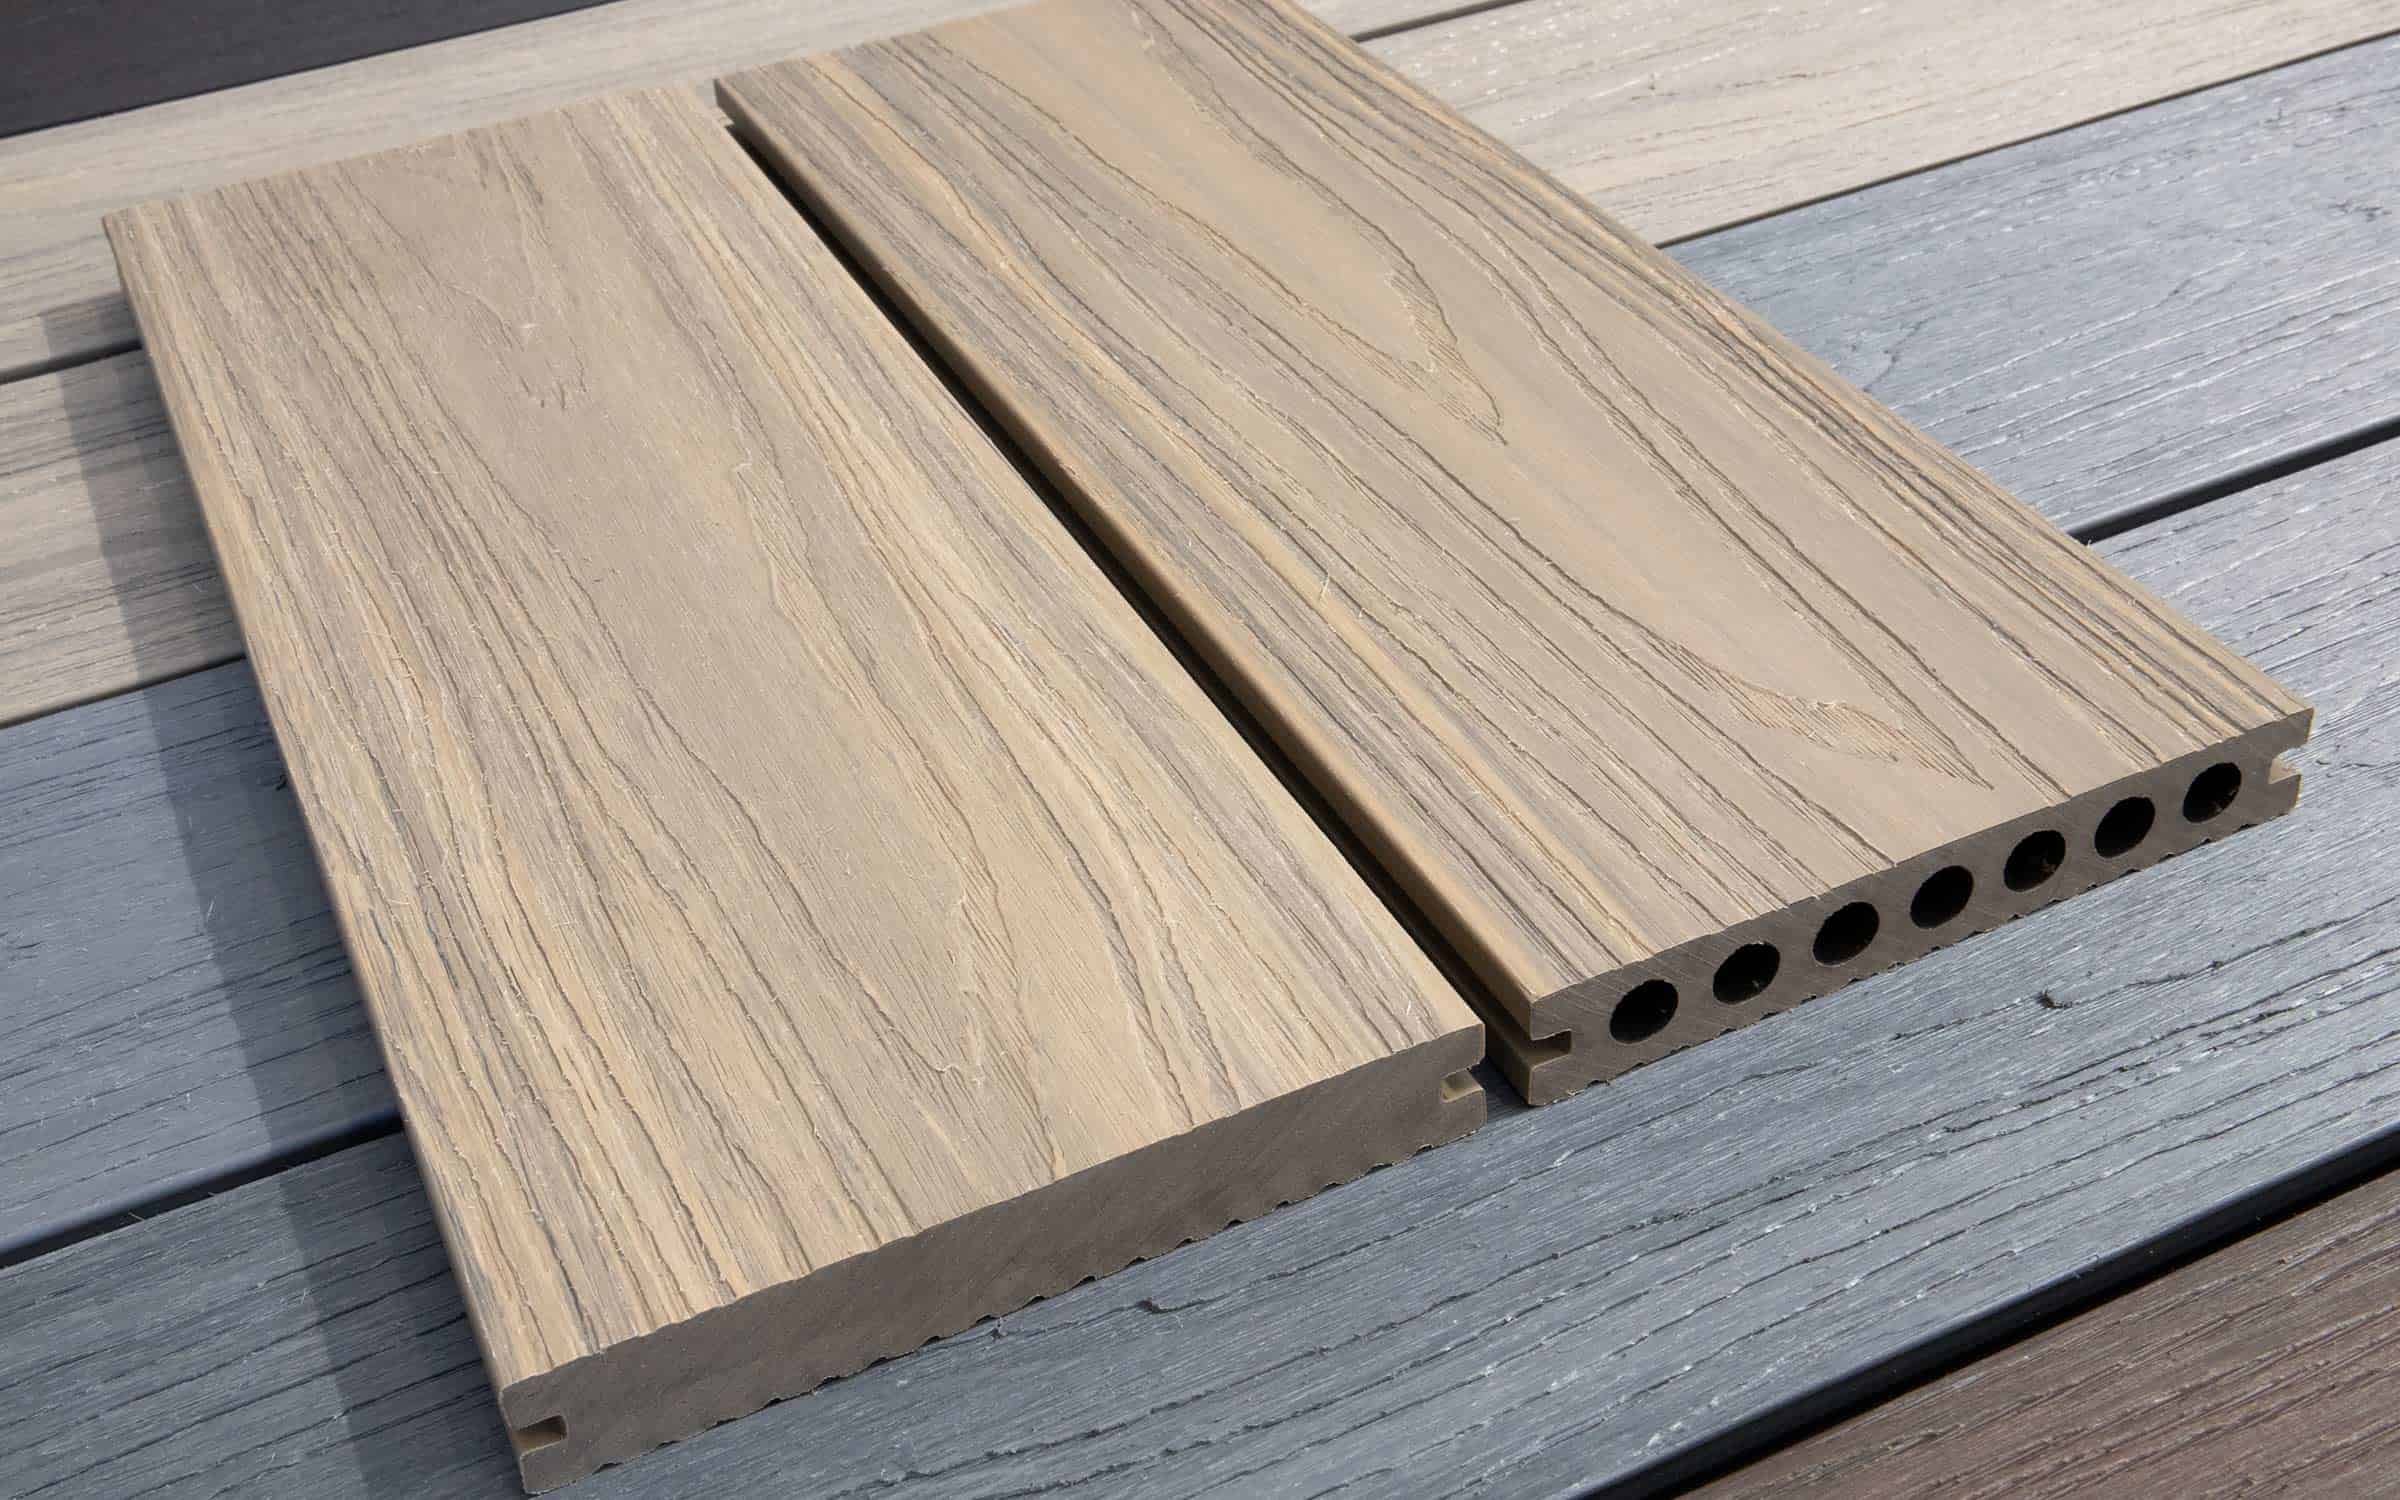 Hollow composite decking boards: what are they?